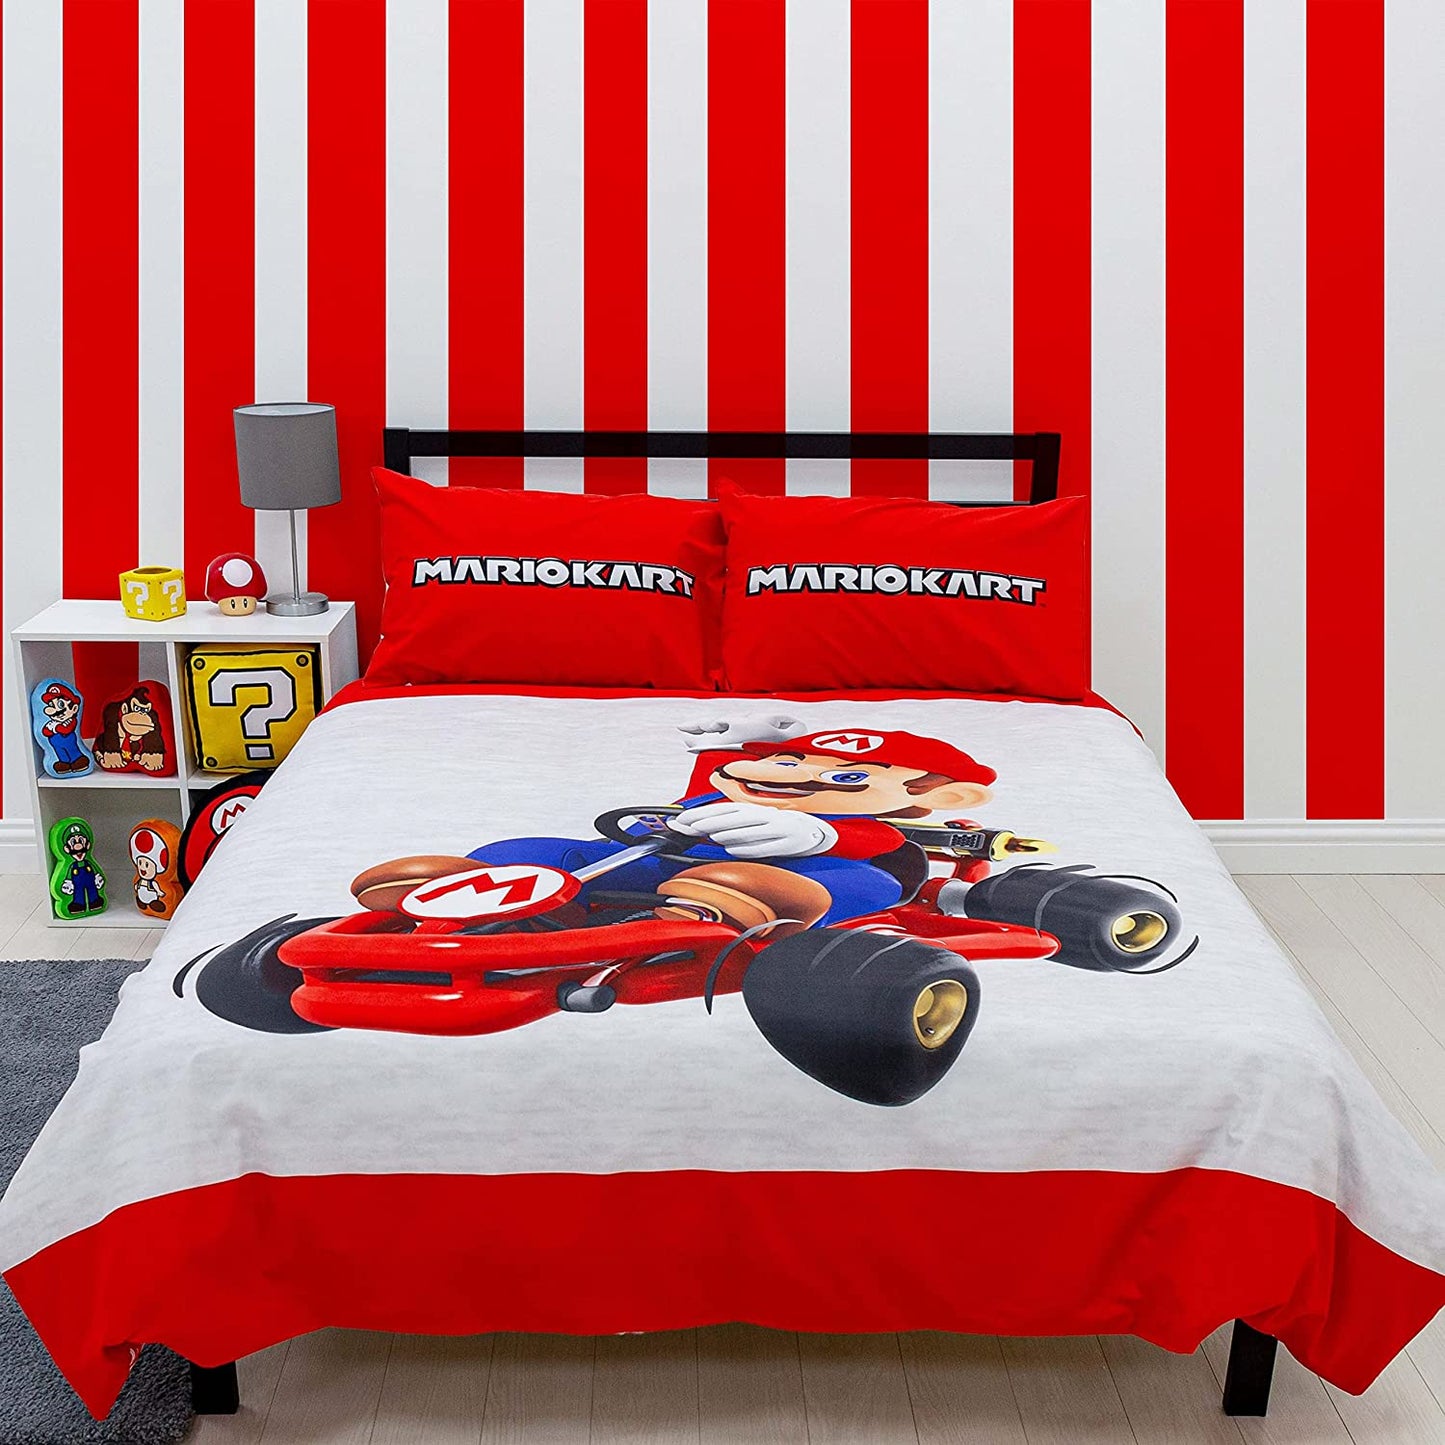 Double Bed Official Super Mario Kart Reversible Duvet Cover Set Character Bedding Red White Grey